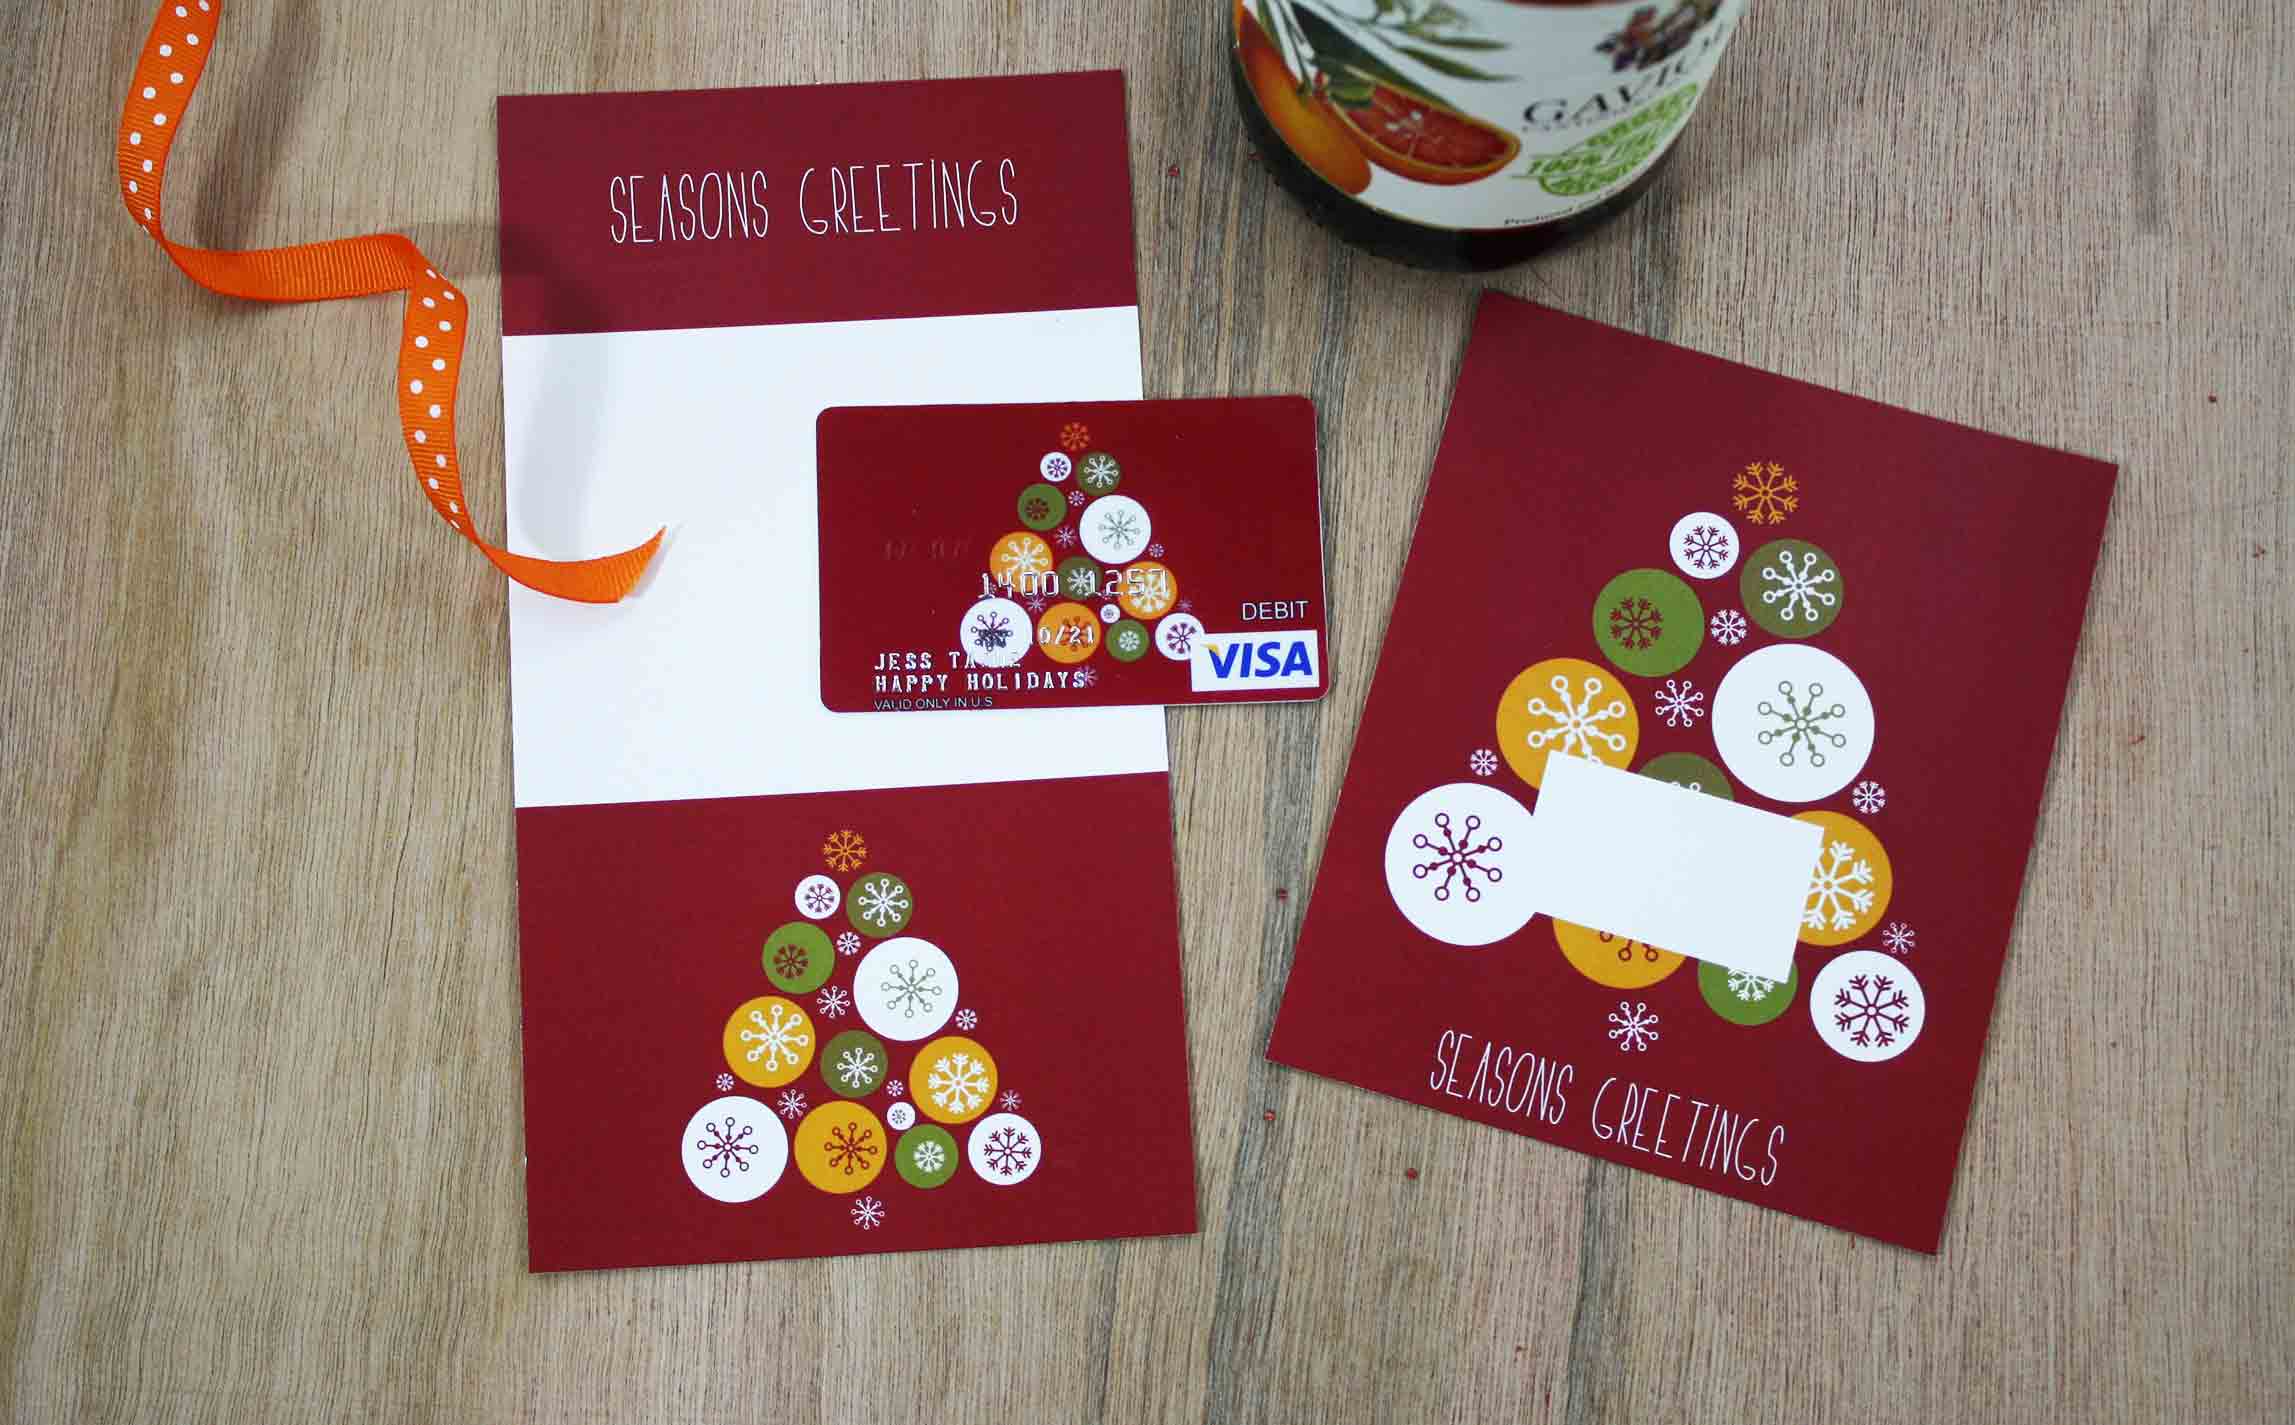 Gift Card in a Greeting Card